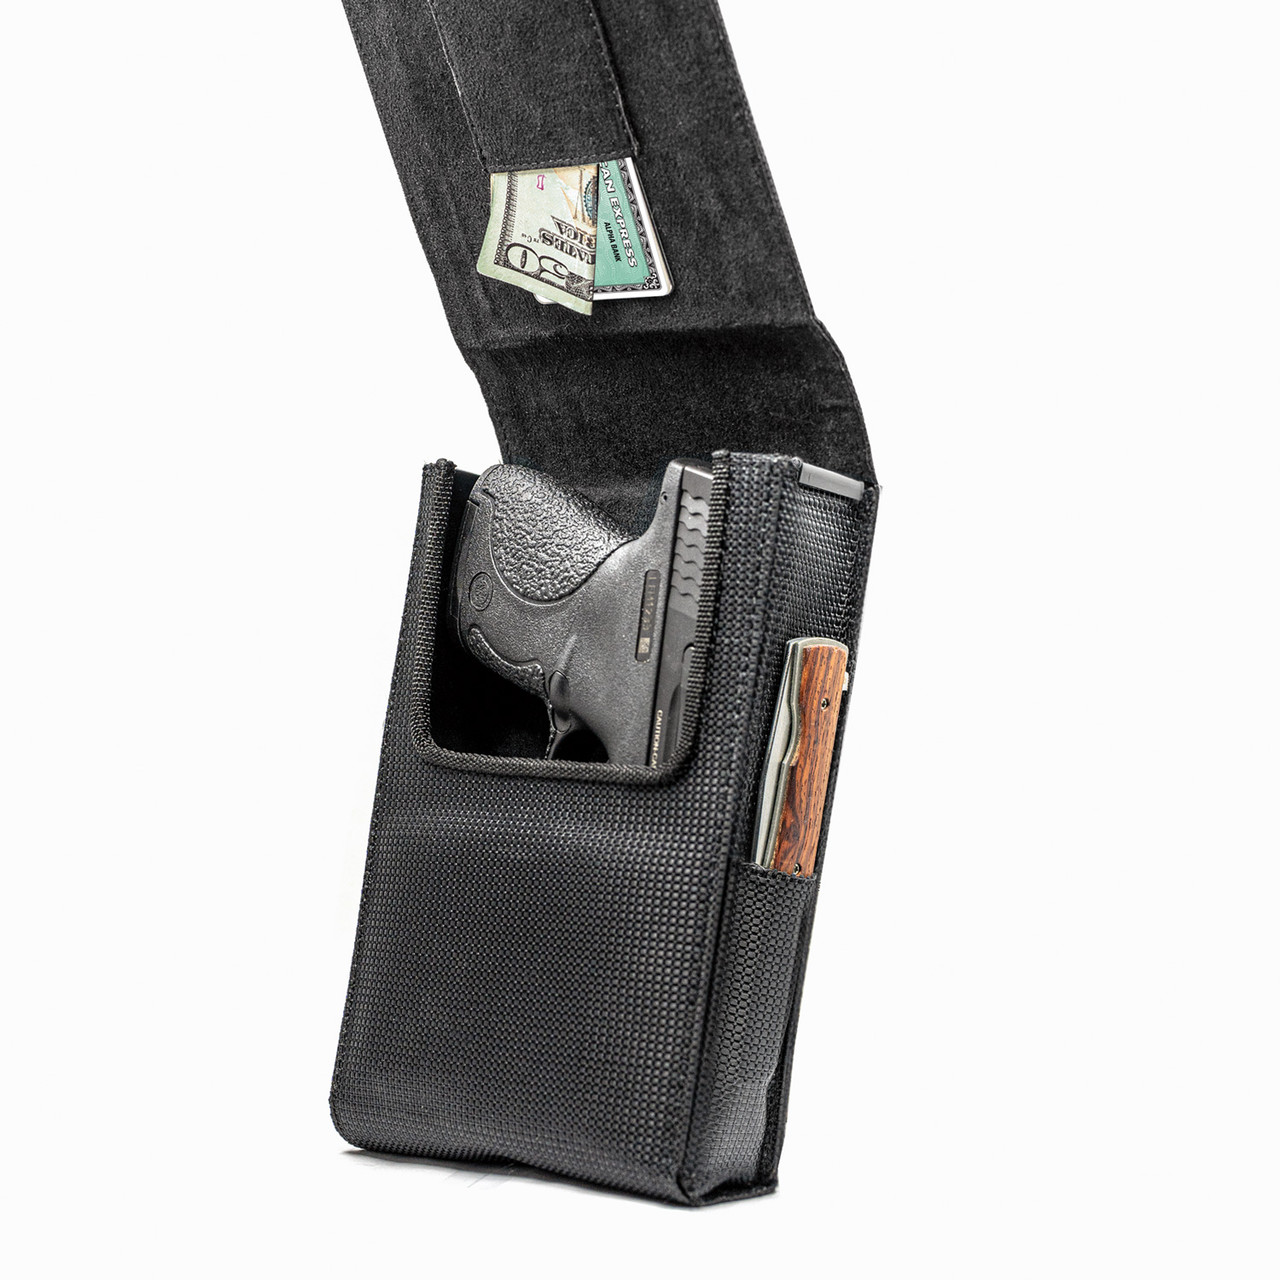 The Springfield 911 (.380) Perfect Holster